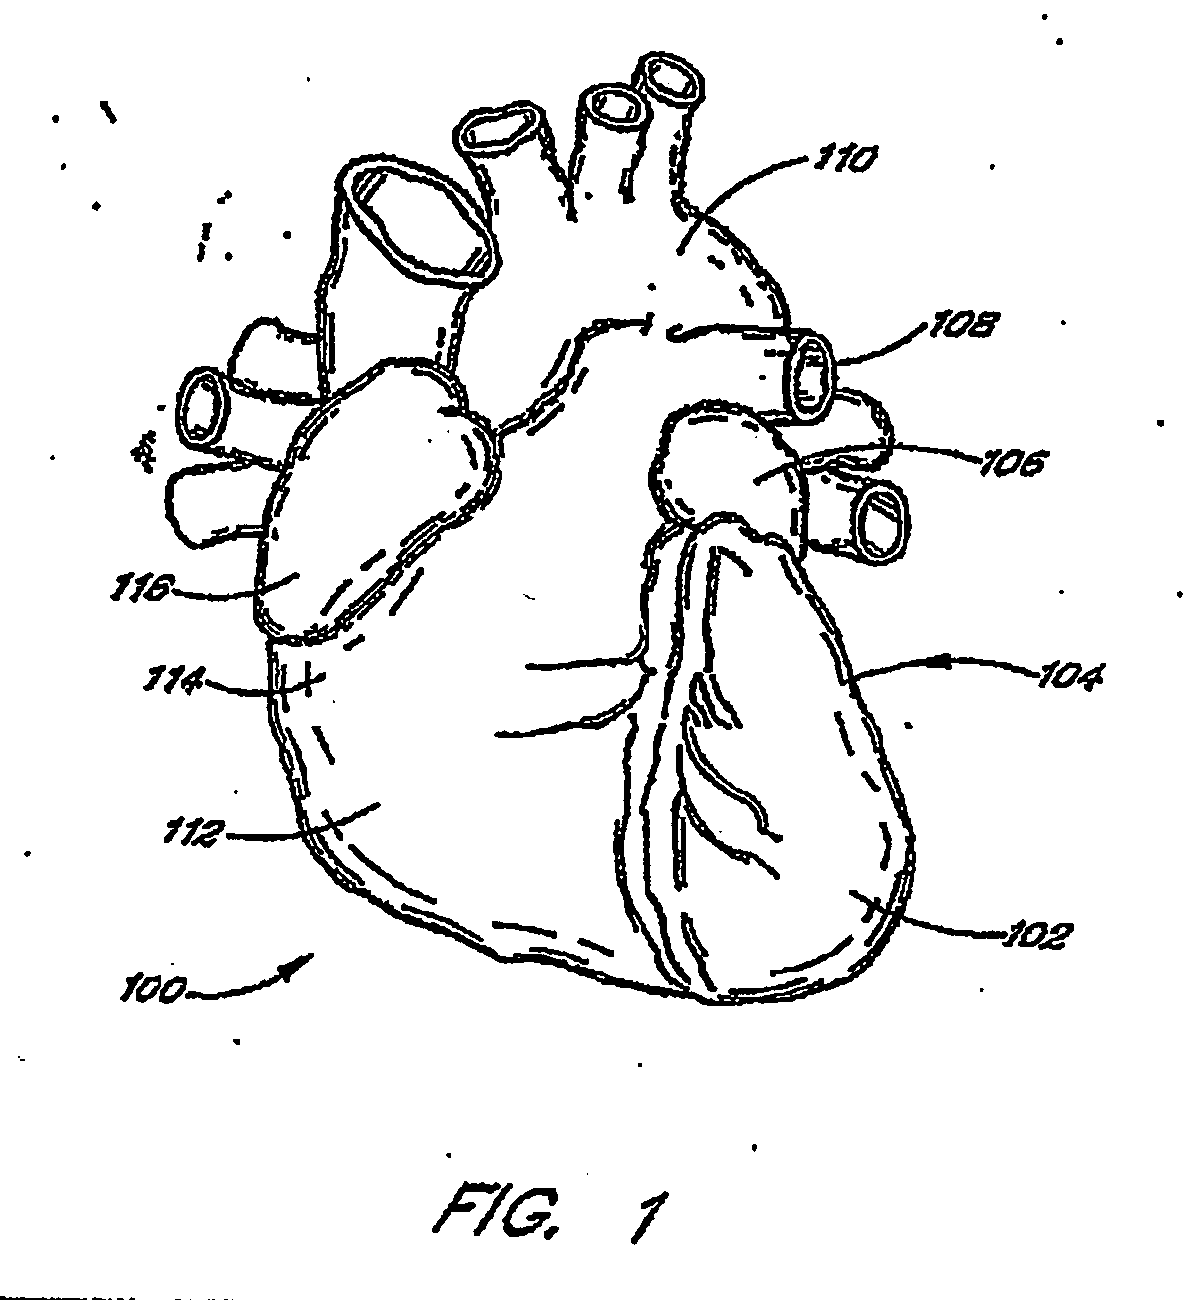 Devices and methods for closing a patent foramen ovale using a countertraction element